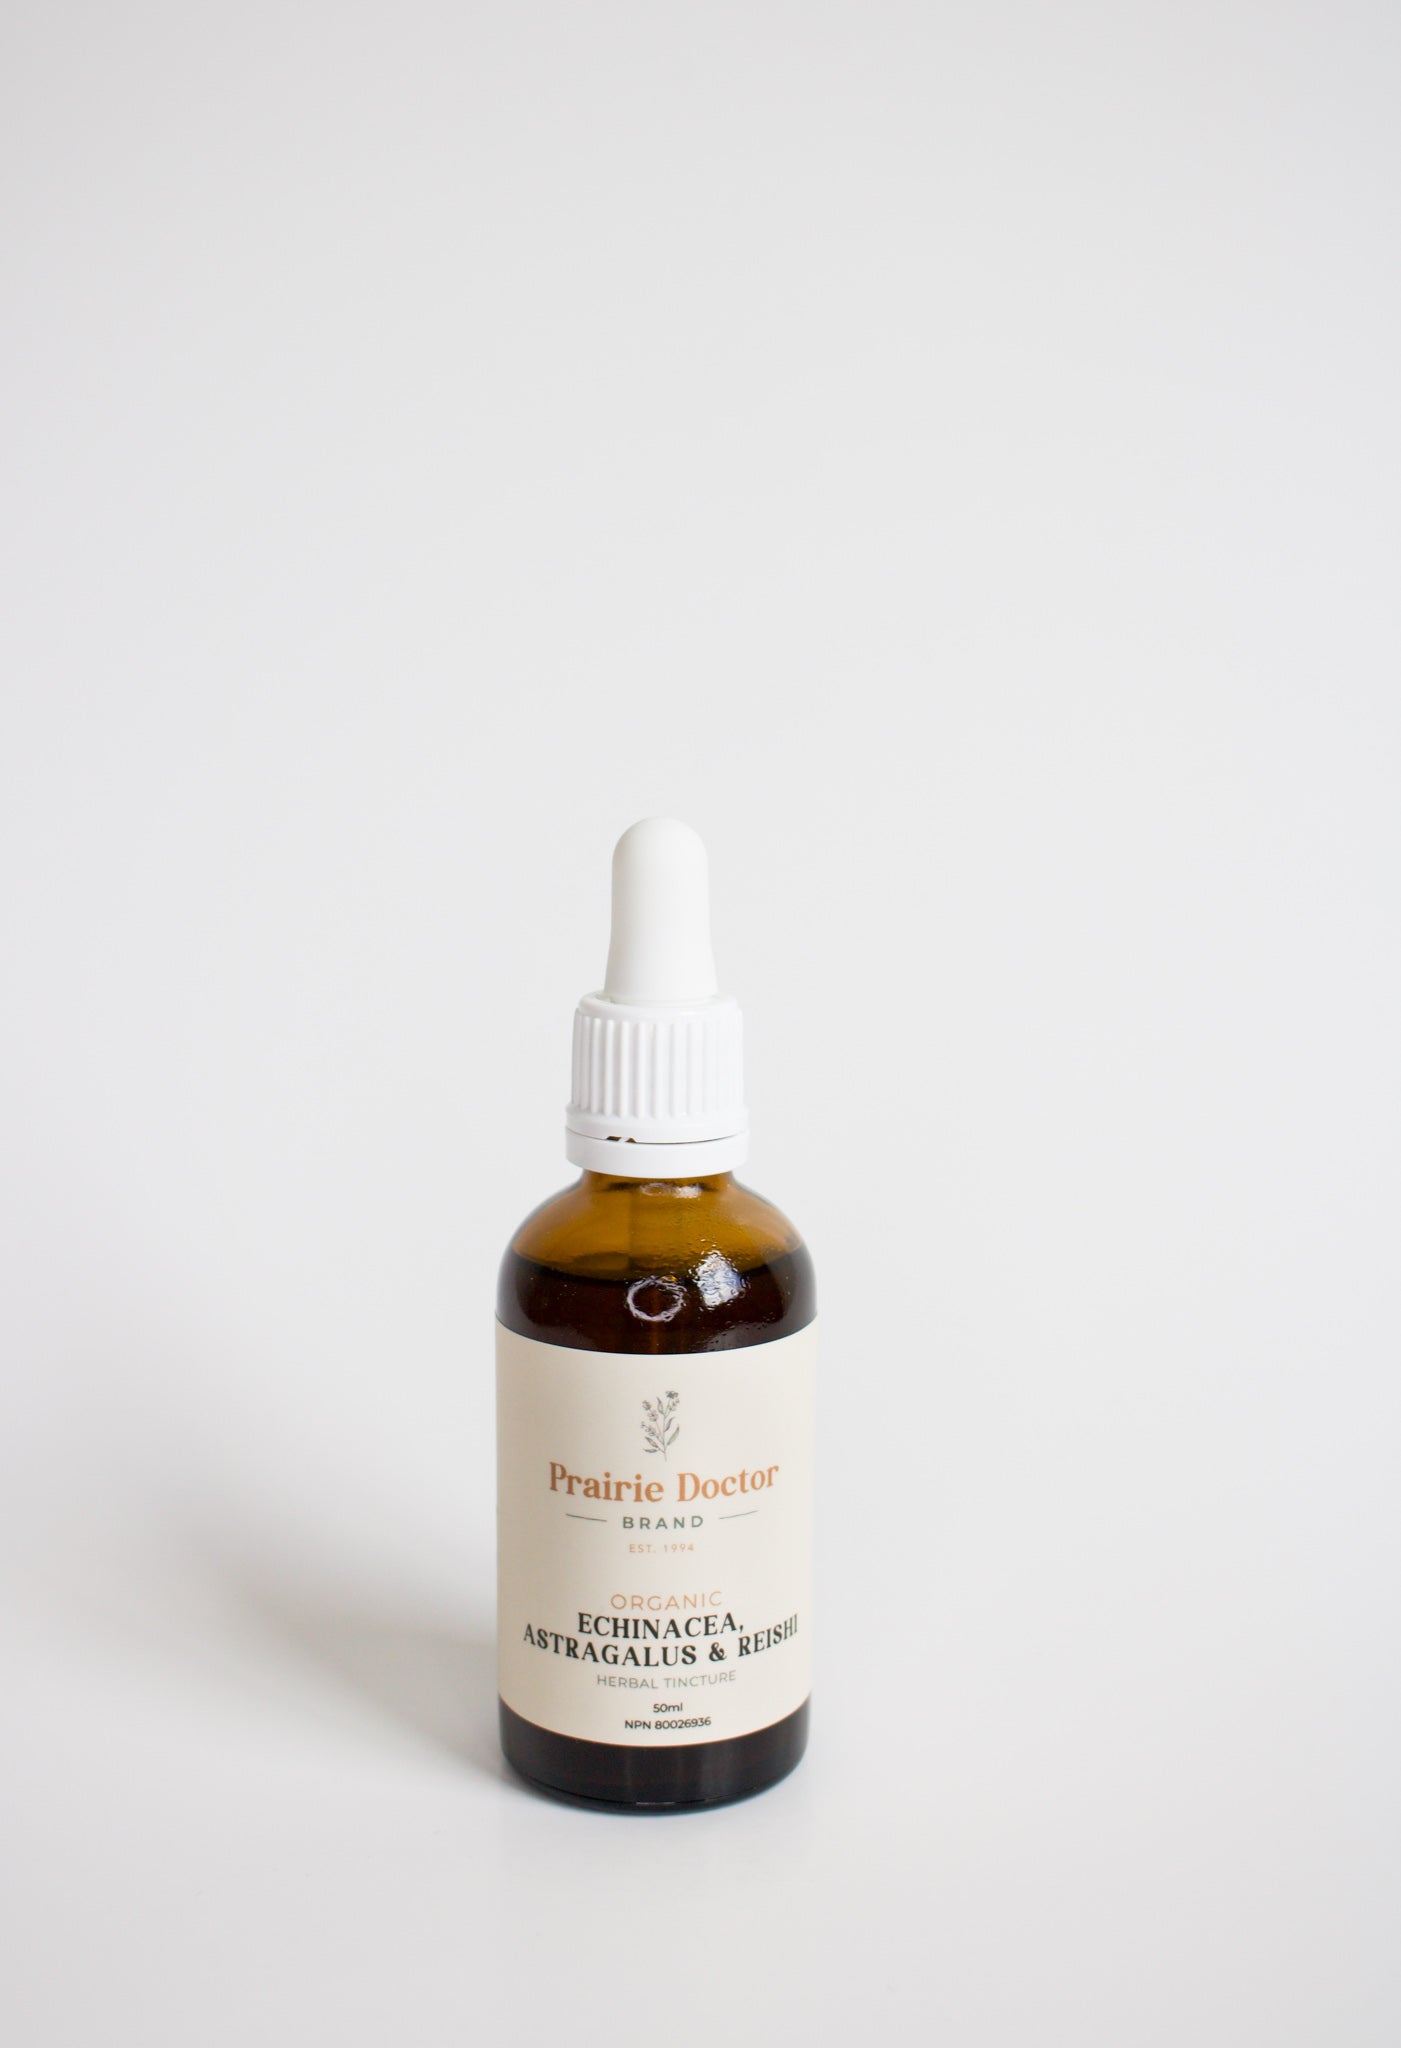 Our Echinacea Astragalus & Reishi herbal tincture is an organic herbal blend that has been crafted to help support and maintain a healthy immune system.